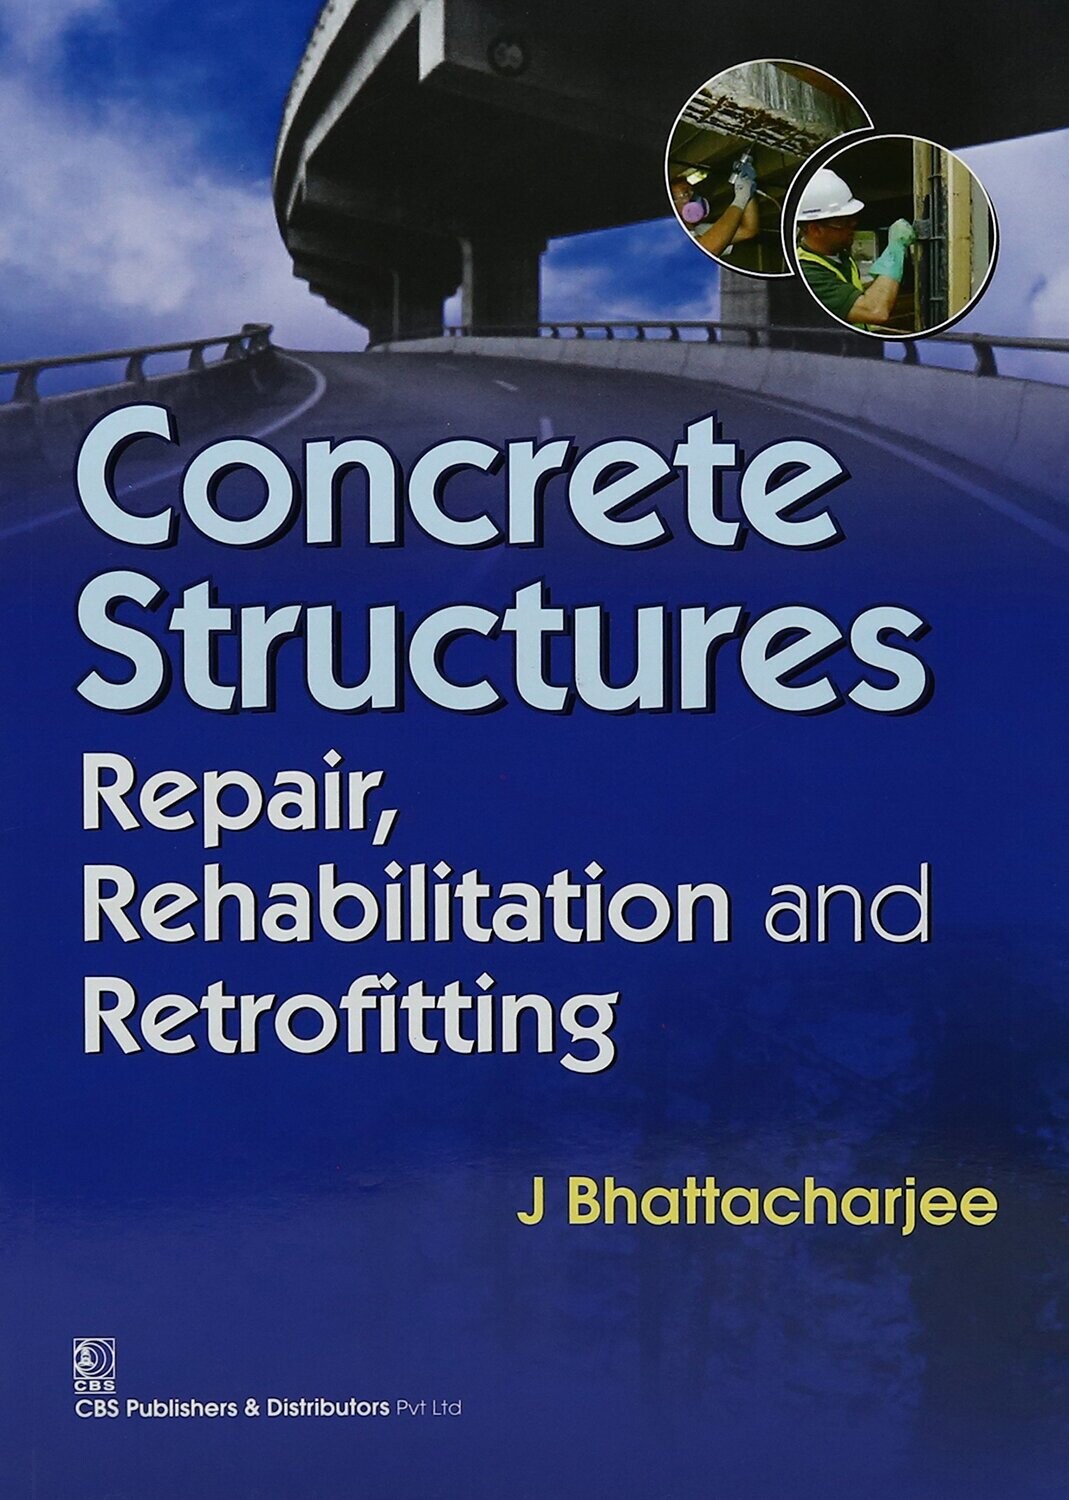 Concrete Structures Repair Rehabilitation And Retrofitting by J Bhattacharjee